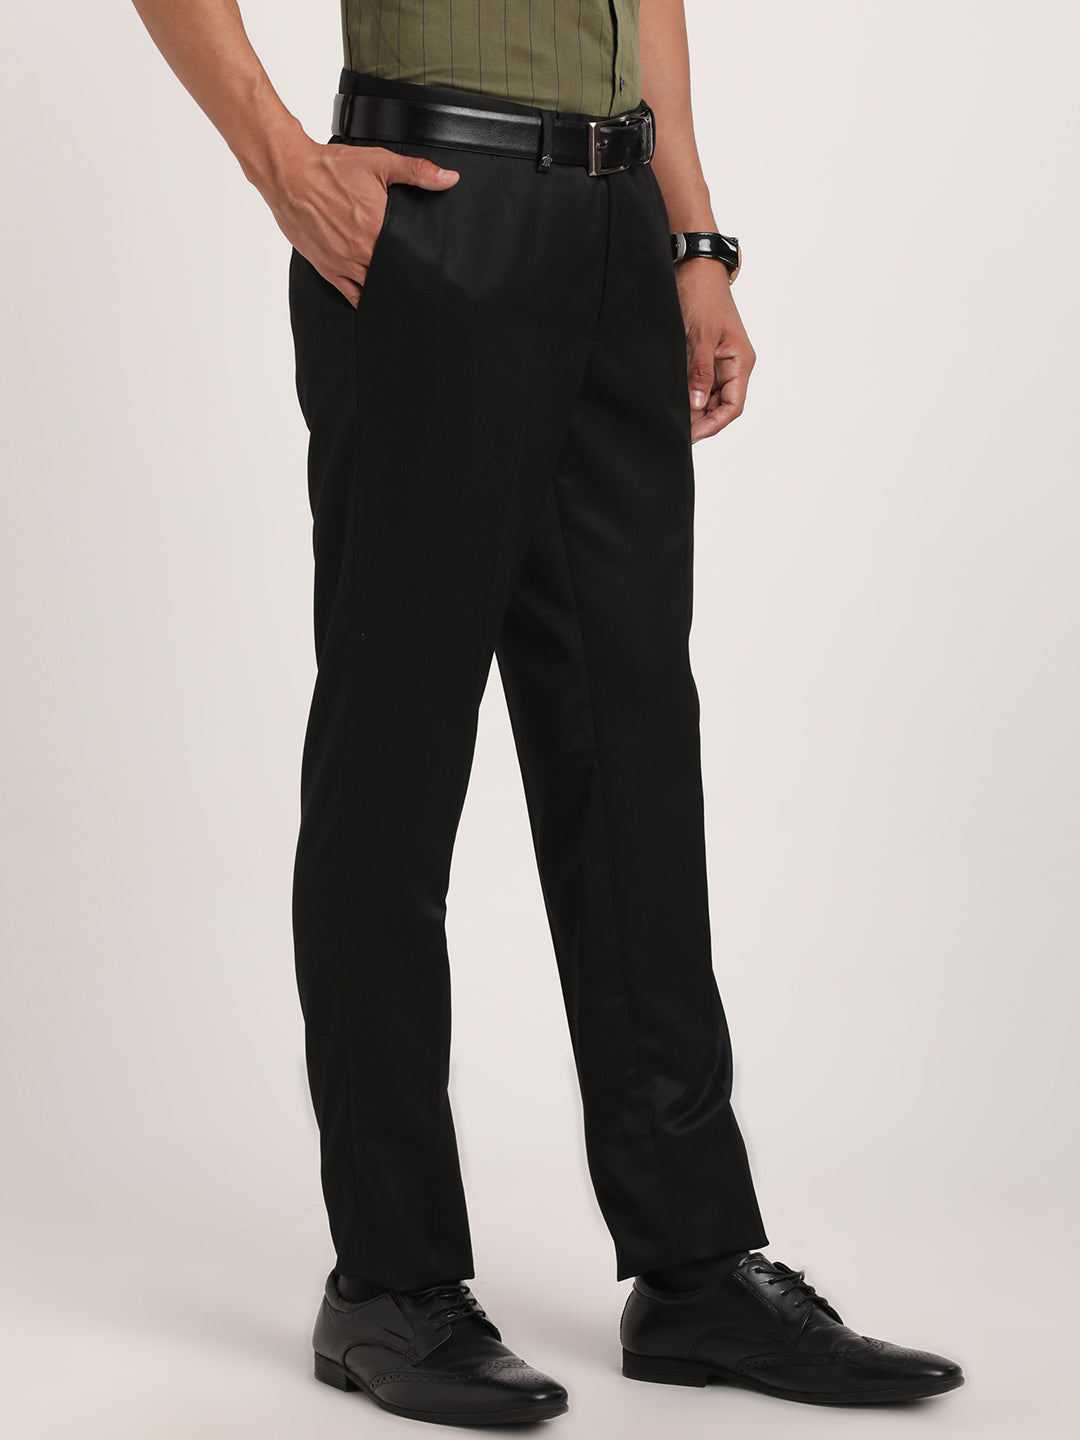 Buy C3 Smoke Black & Space Blue Coloured Classic Formal Trousers for Men. -  FPO2_4531_ at Amazon.in